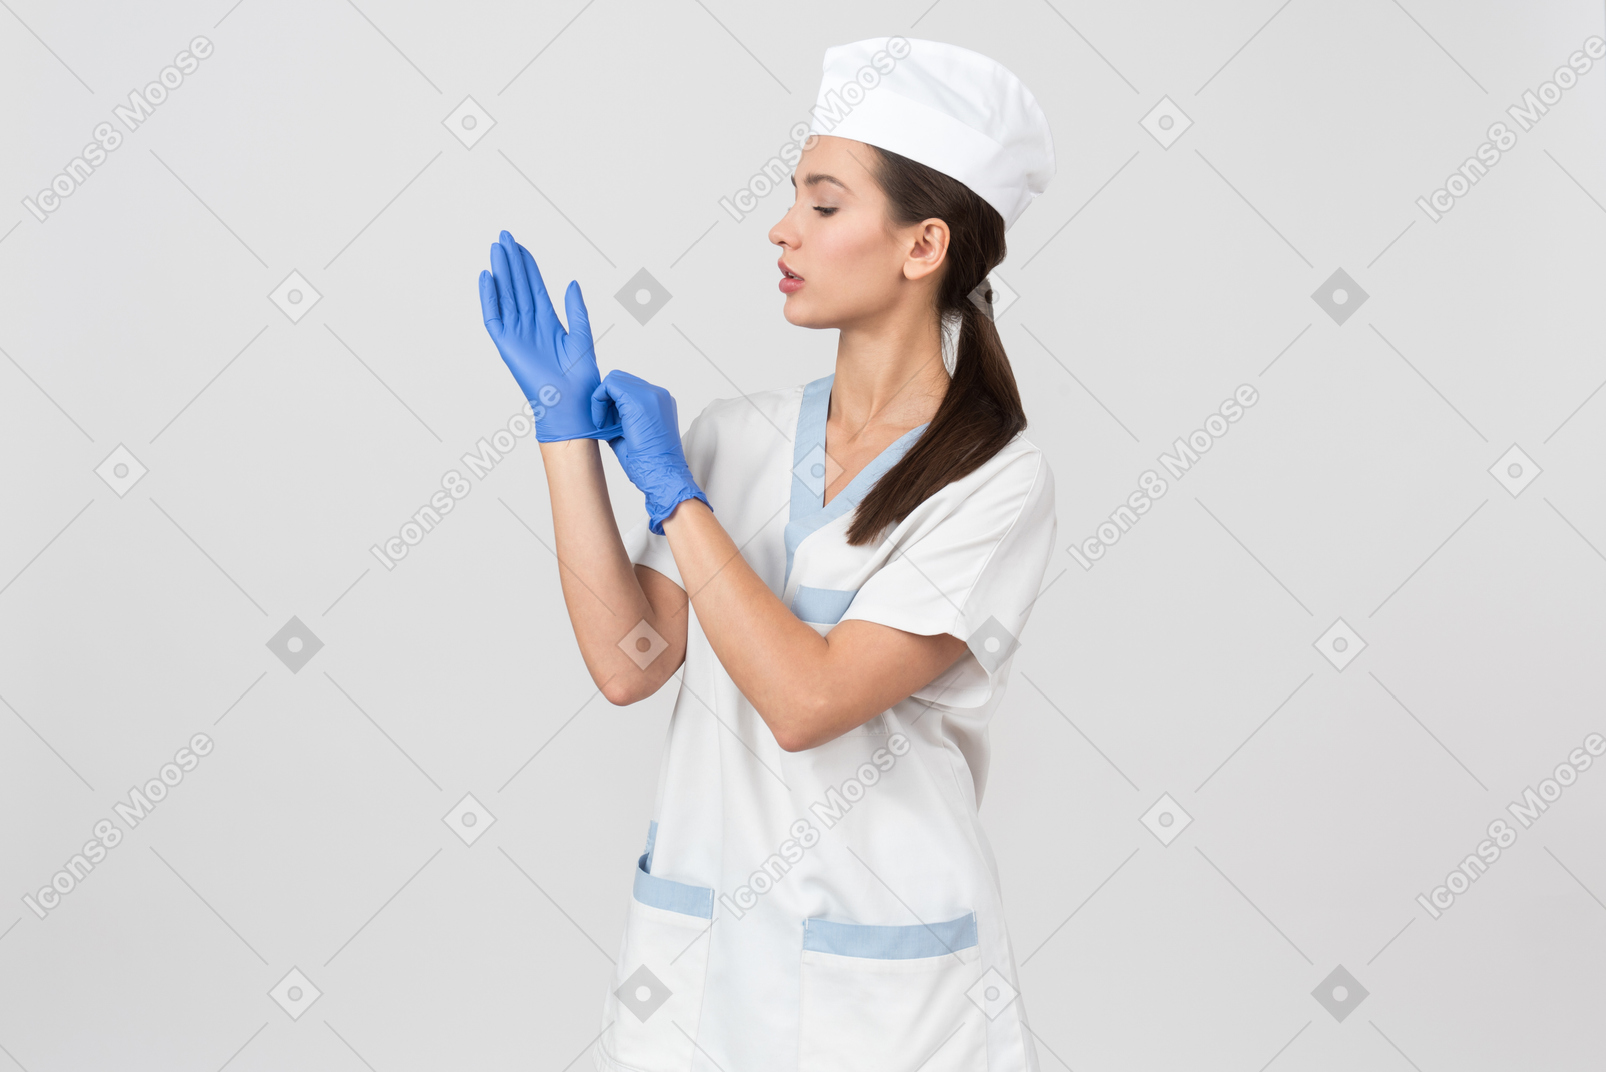 Attractive nurse in a medical robe putting on latex gloves